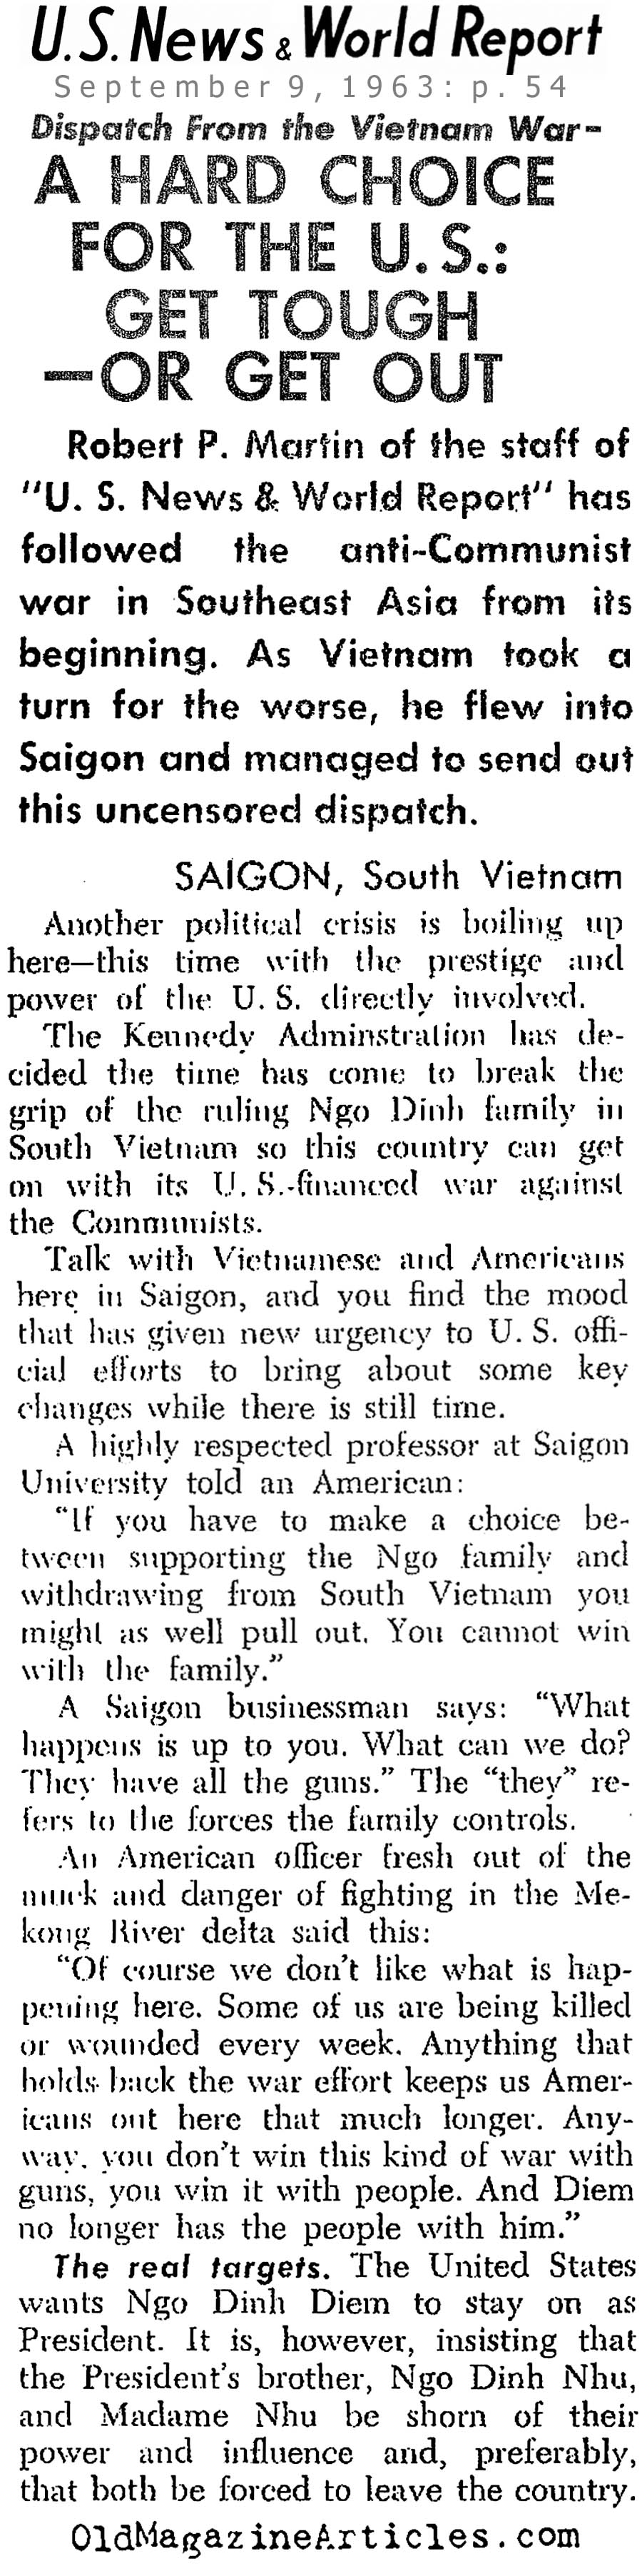 What To Do About Diem? (United States News, 1963)